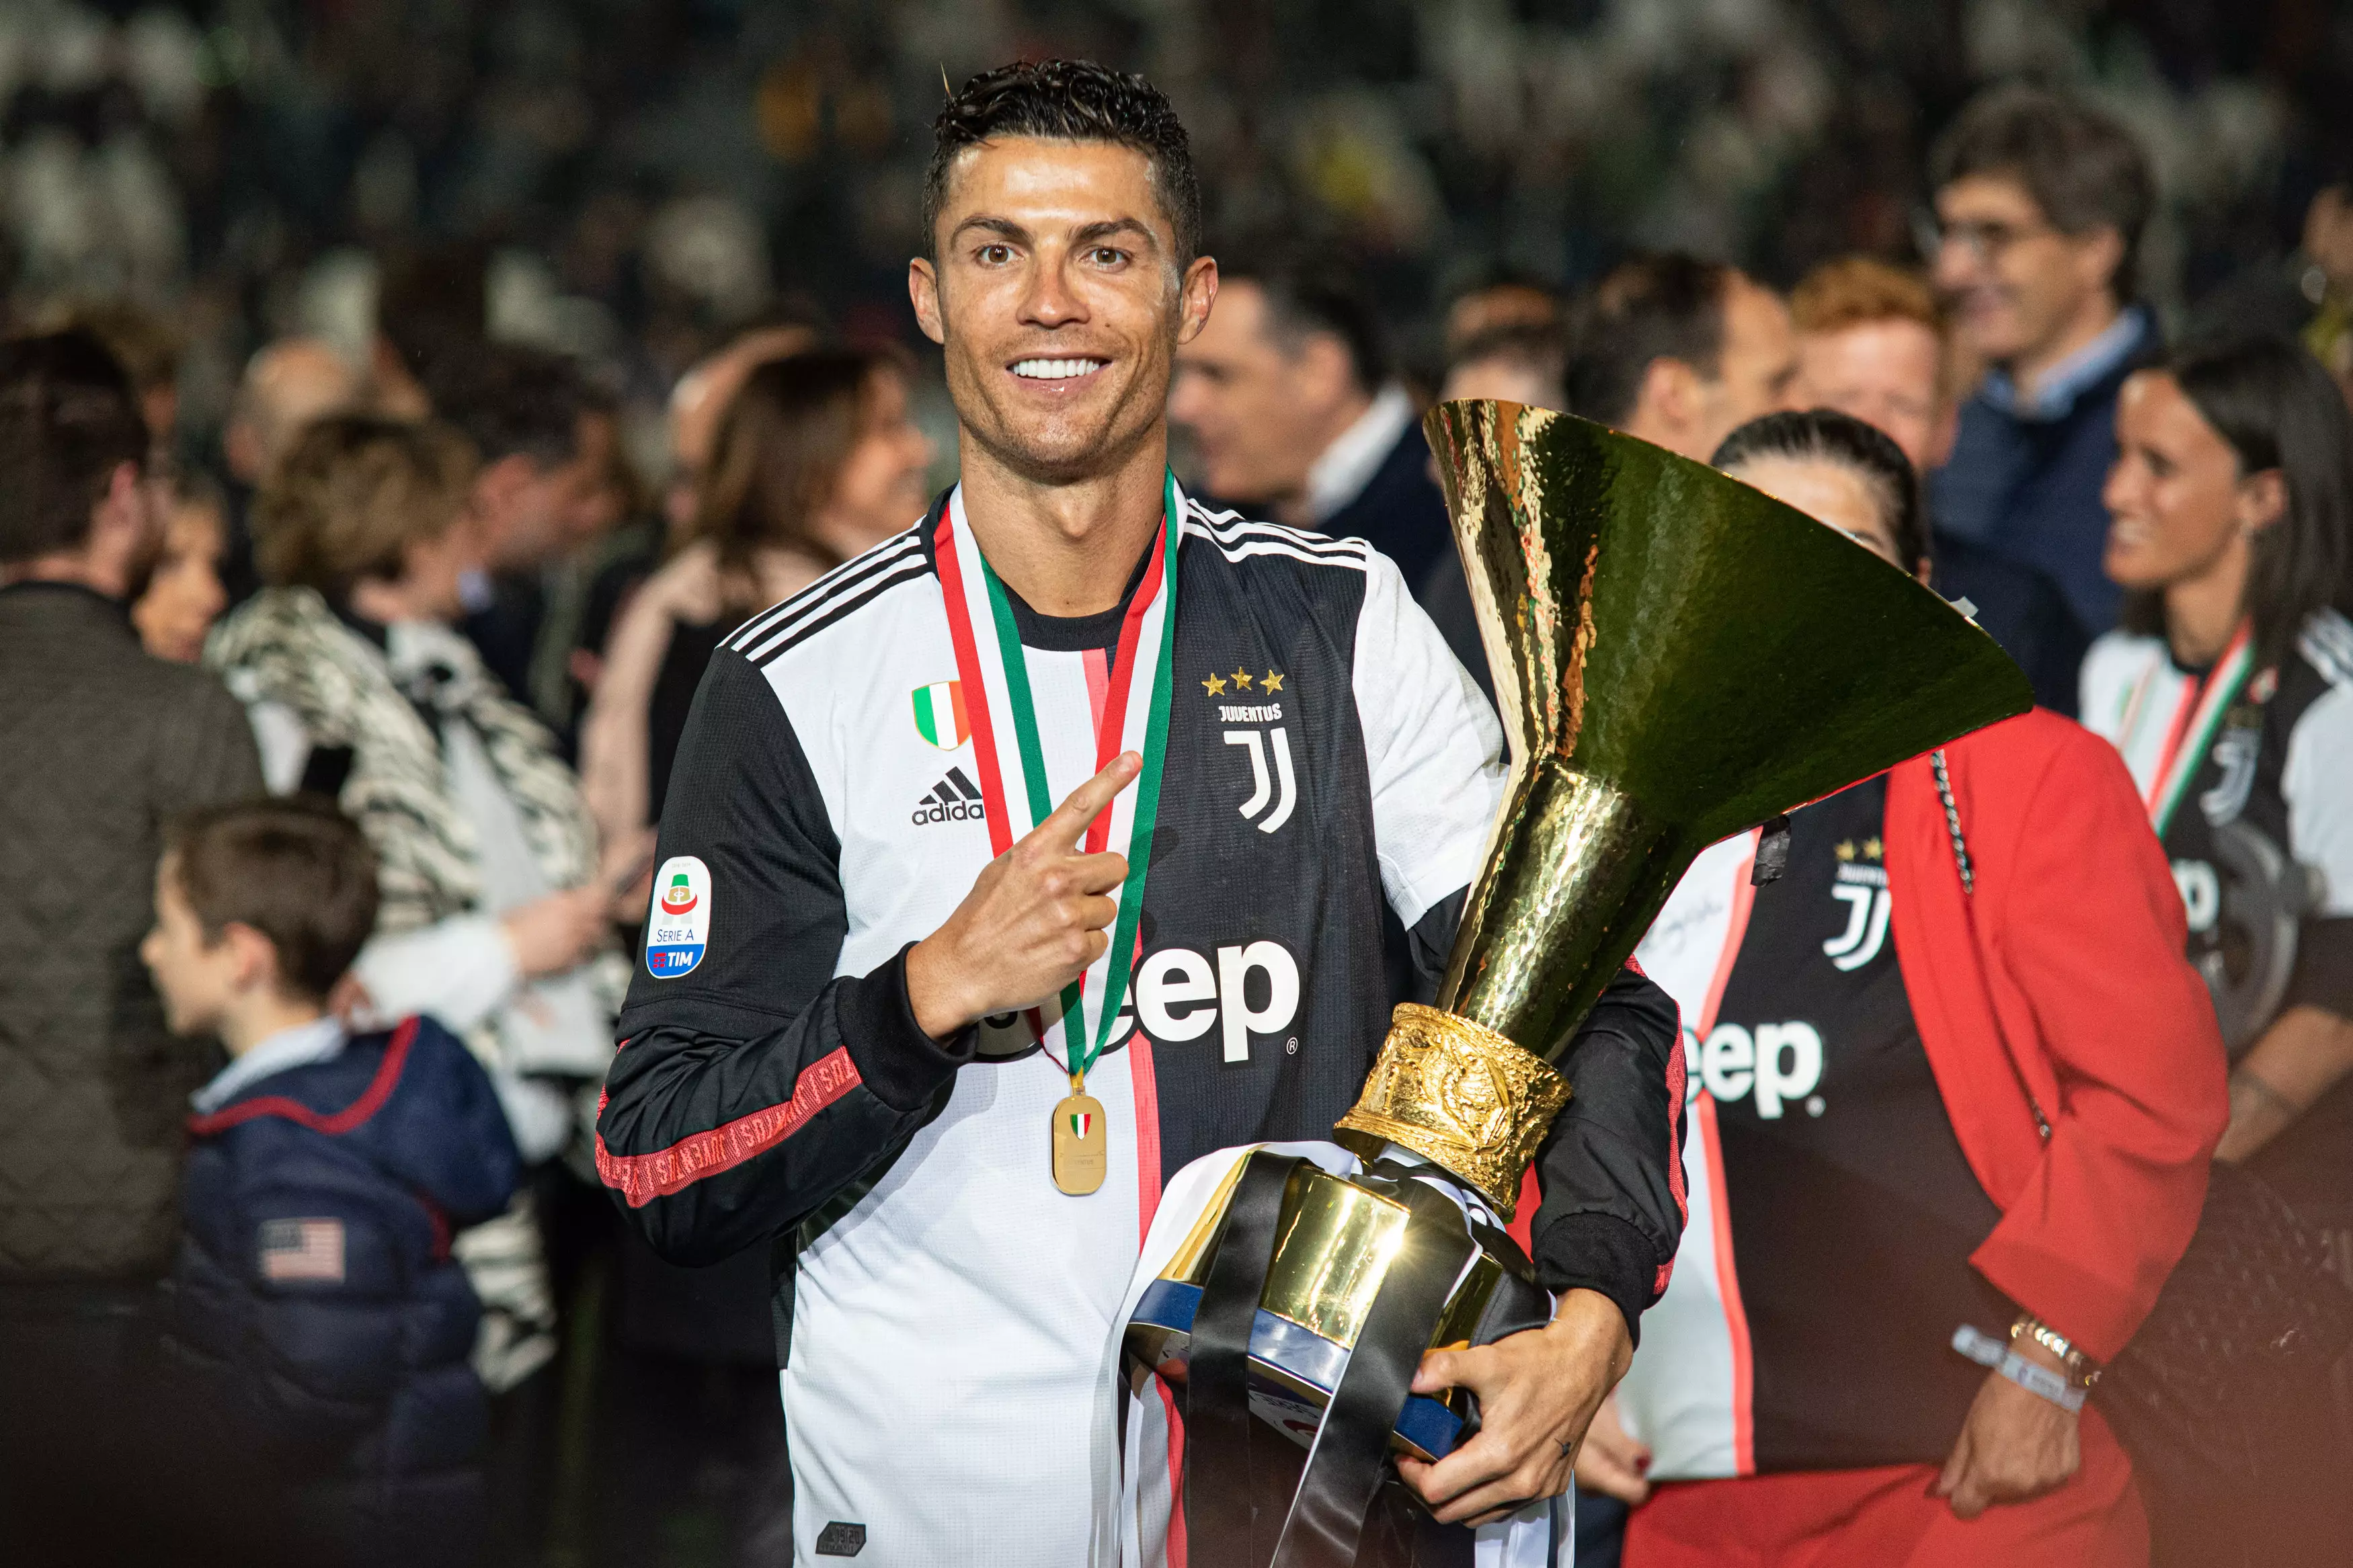 Ronaldo with the trophy and the controversial shirt. Image: PA Images